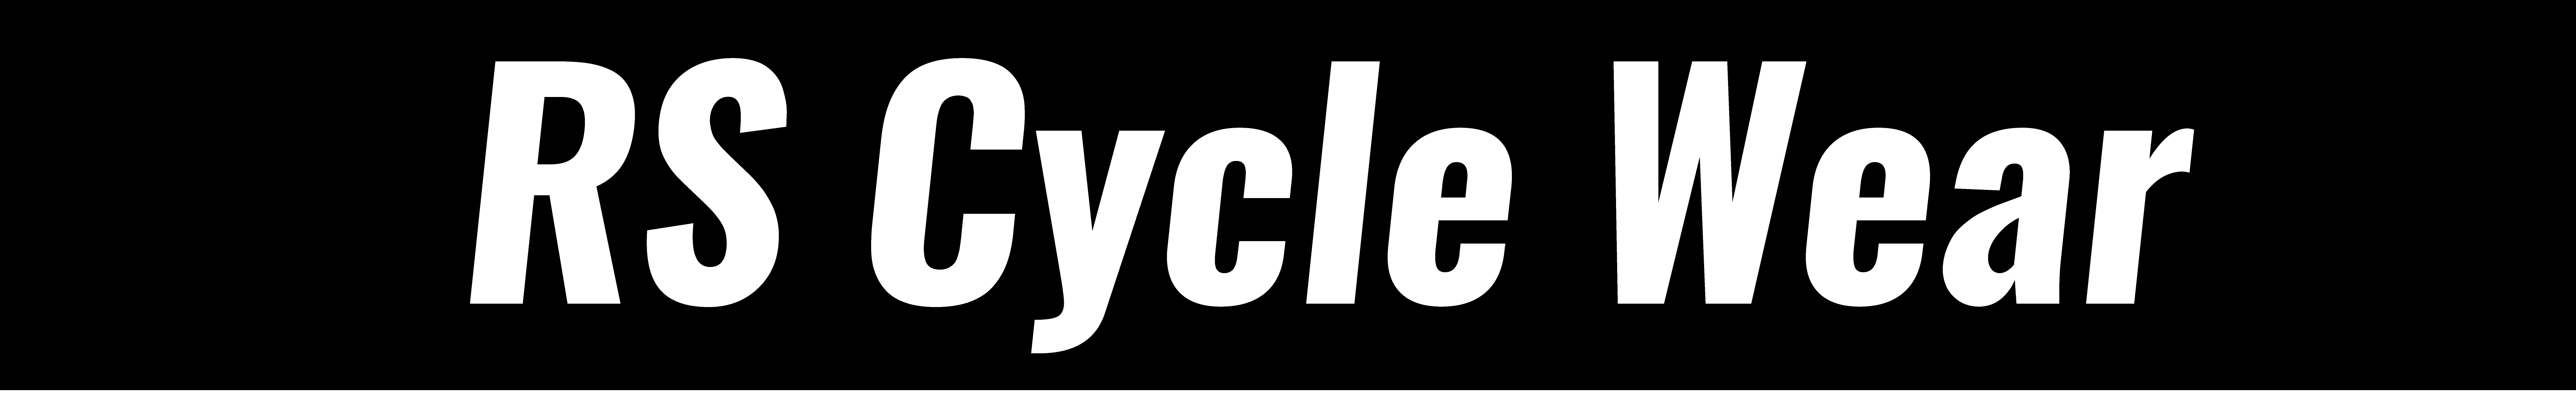 RS Cycle Wear